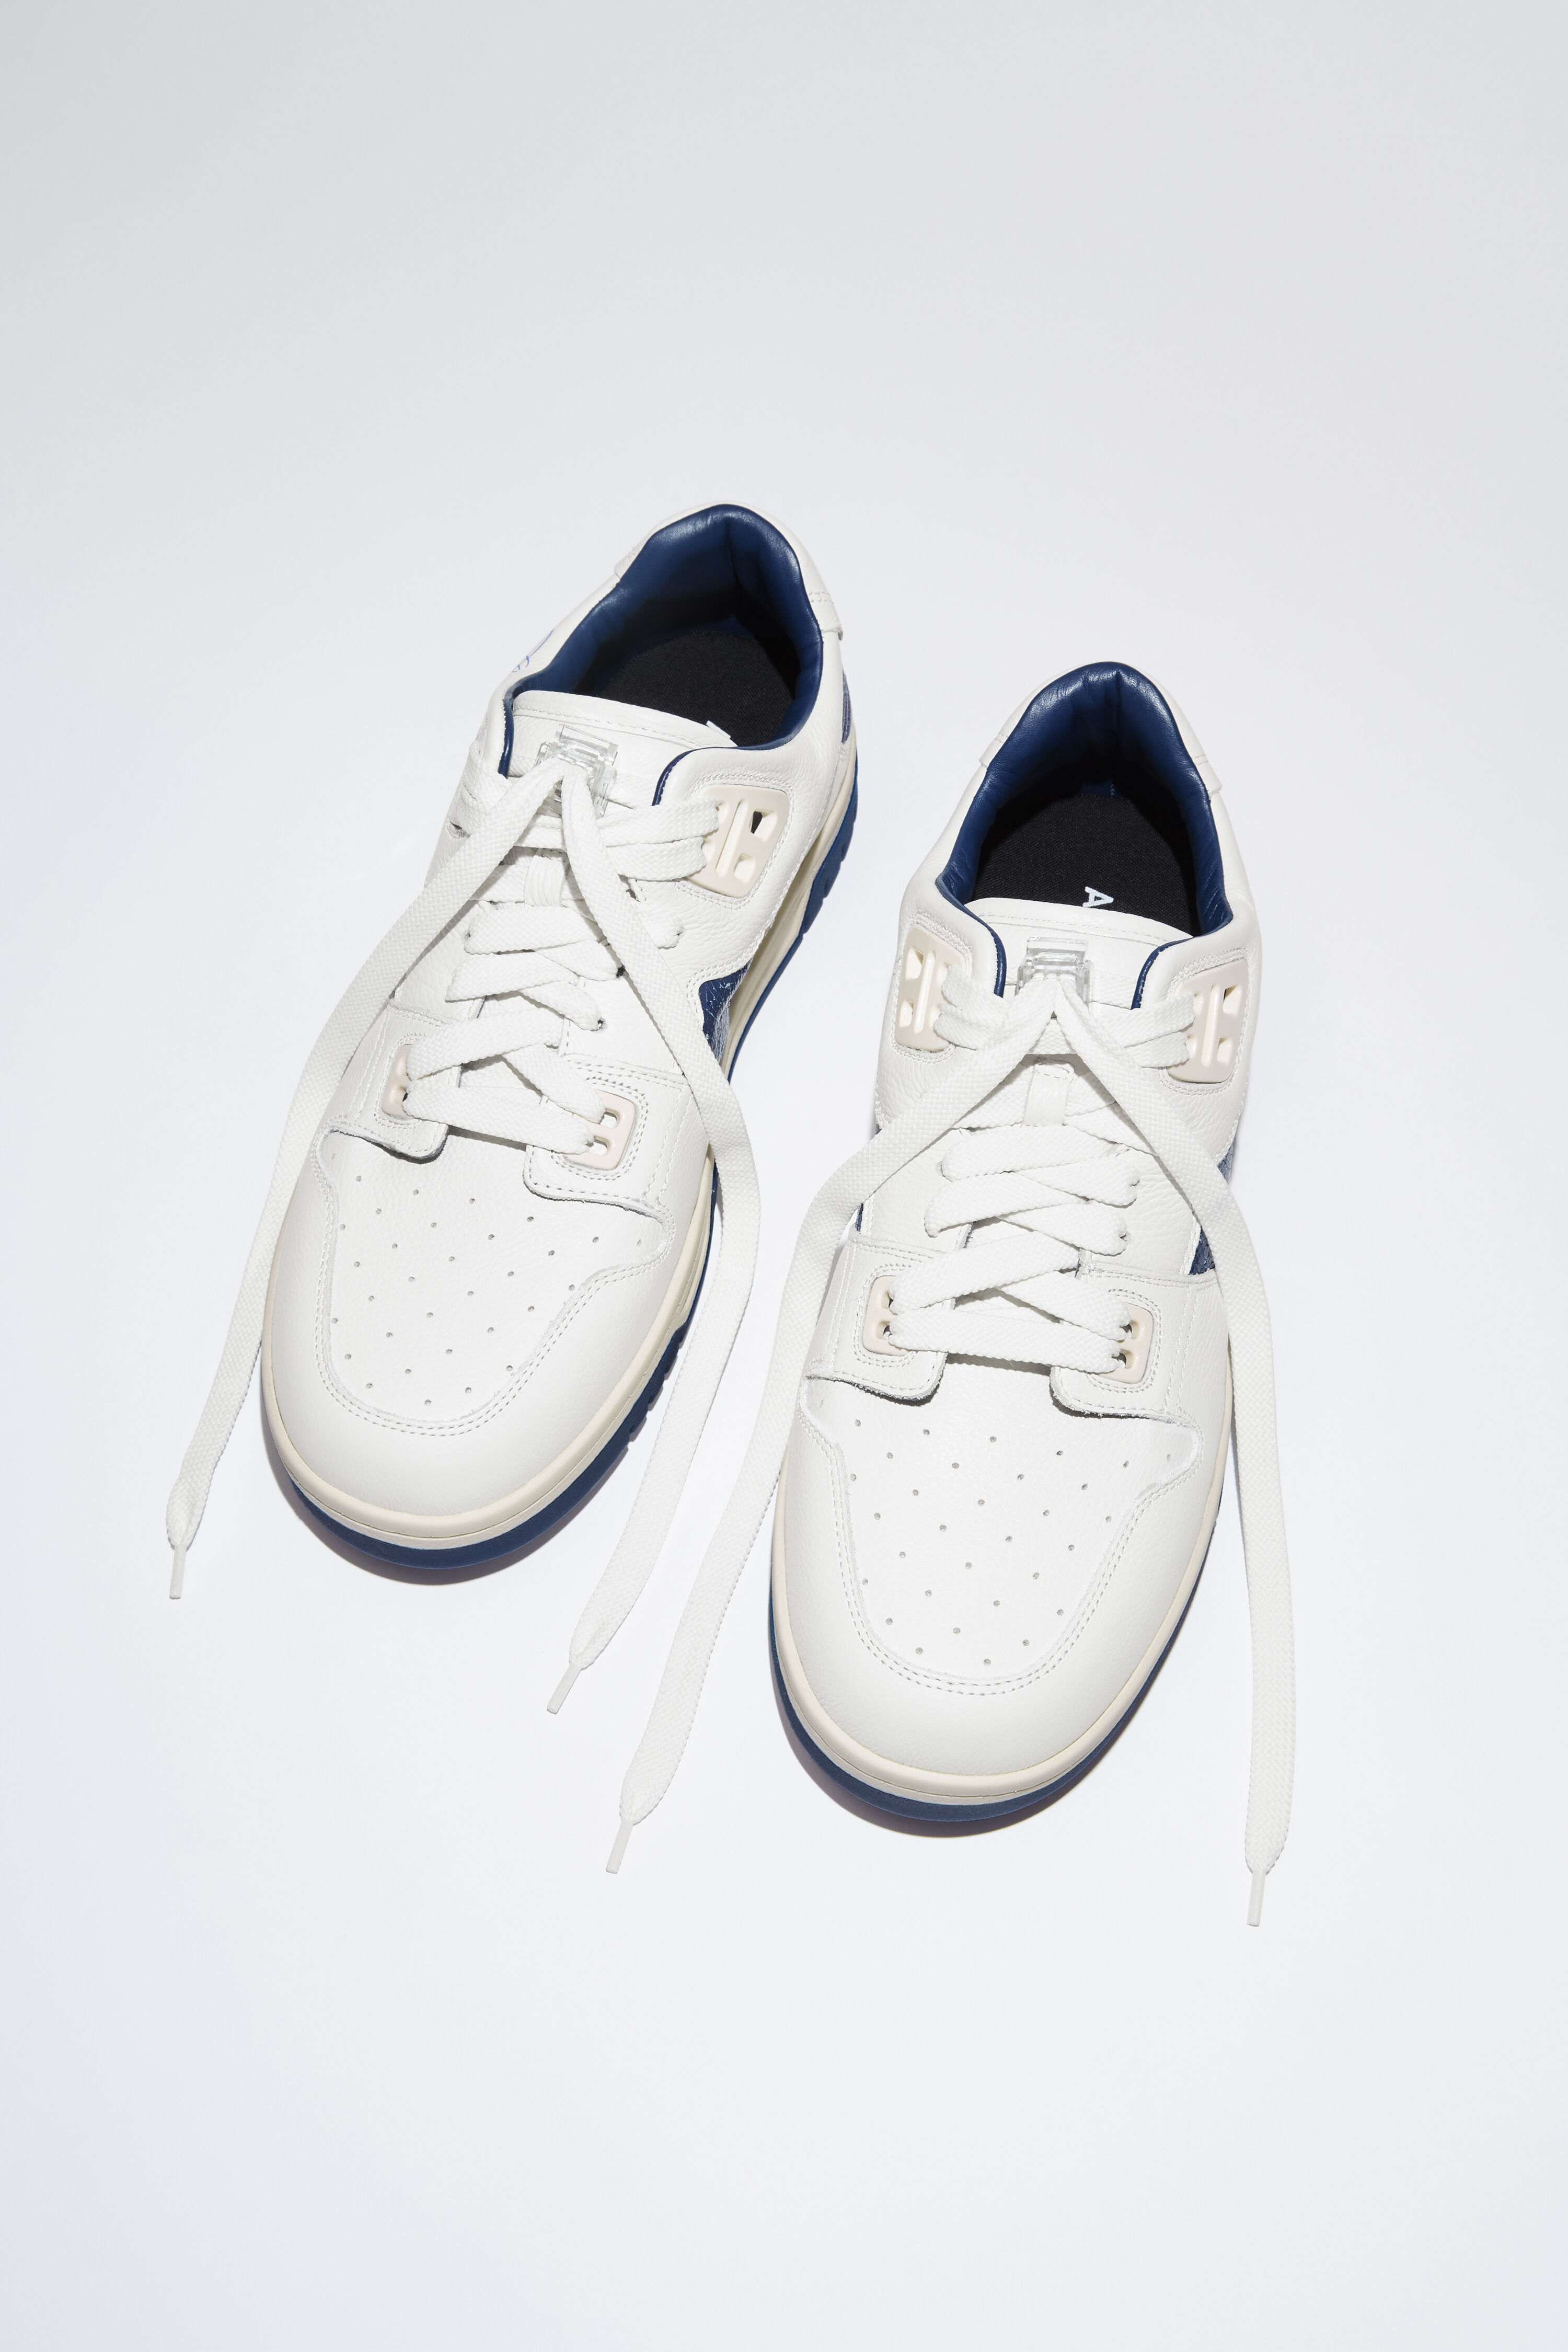 Acne Studios - Low top sneakers - White/blue